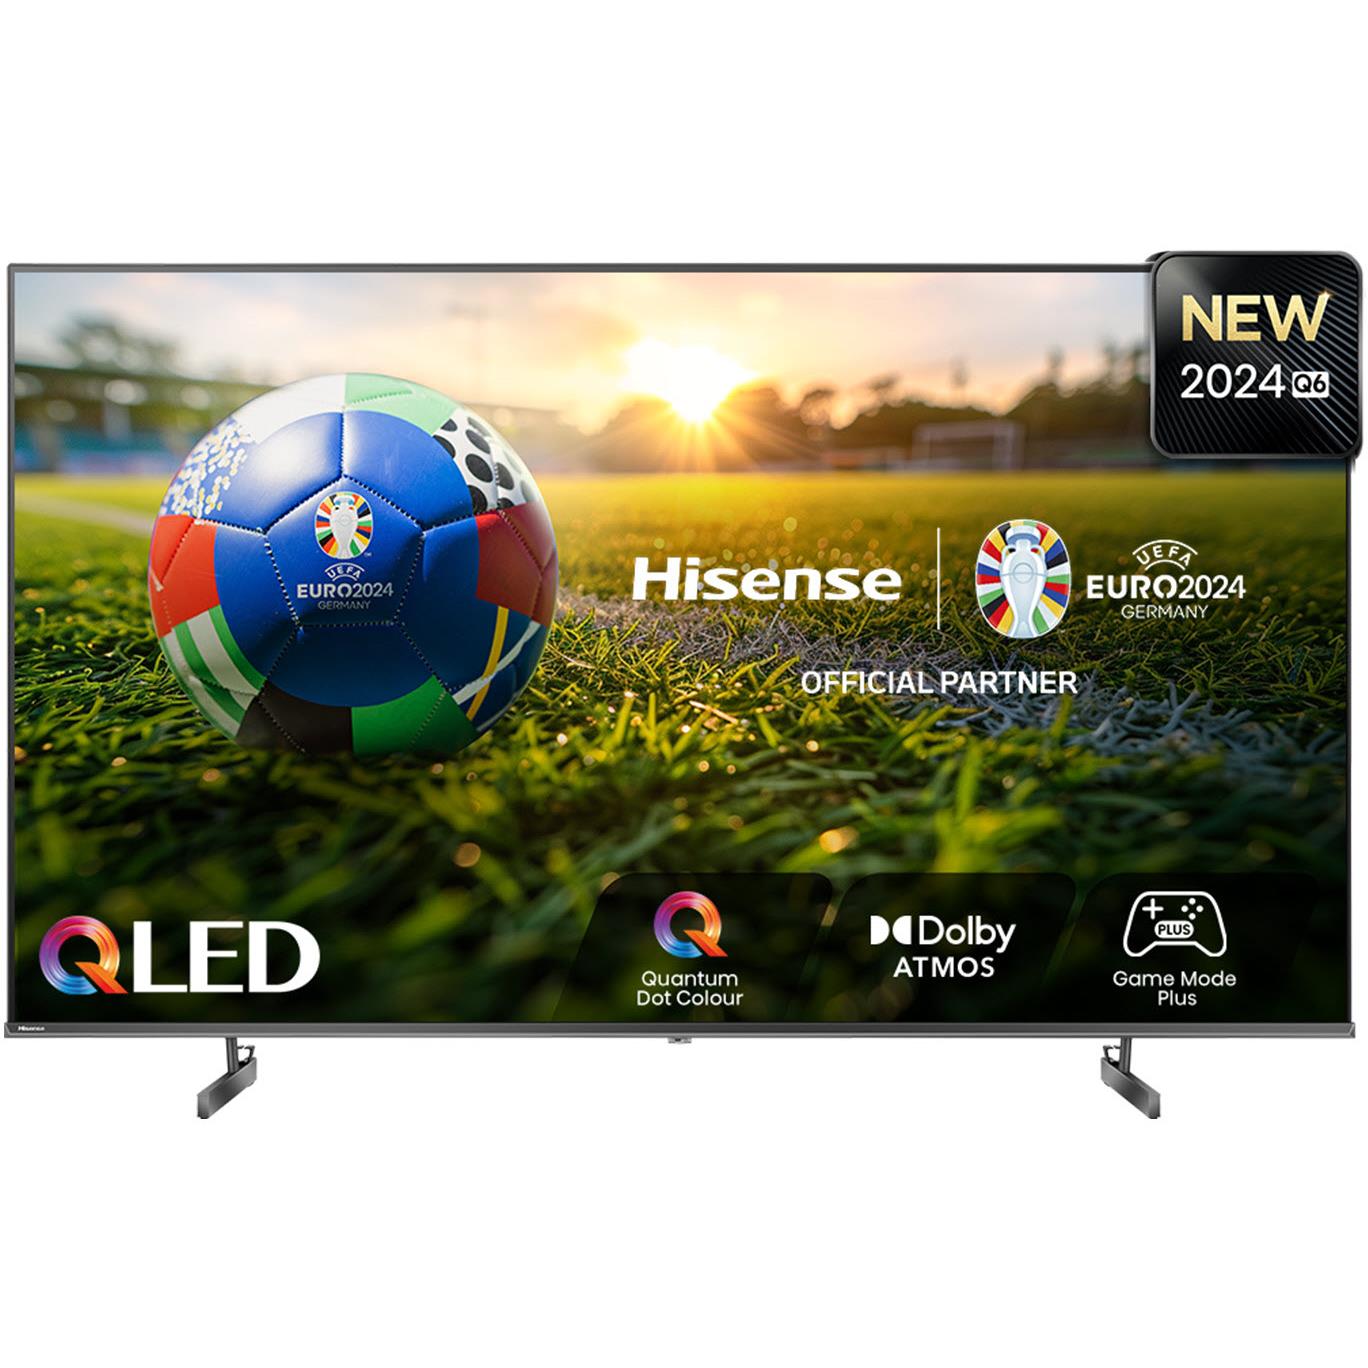 Hisense A6 Series 65 Inch Class 4k Uhd Smart Google Tv Voice Remote Dolby Vision Hdr Dts Virtual X Sports Game Modes Chromecast Built 65a6h Model Hisense A6 Series 65 Inch Class 4k Uhd